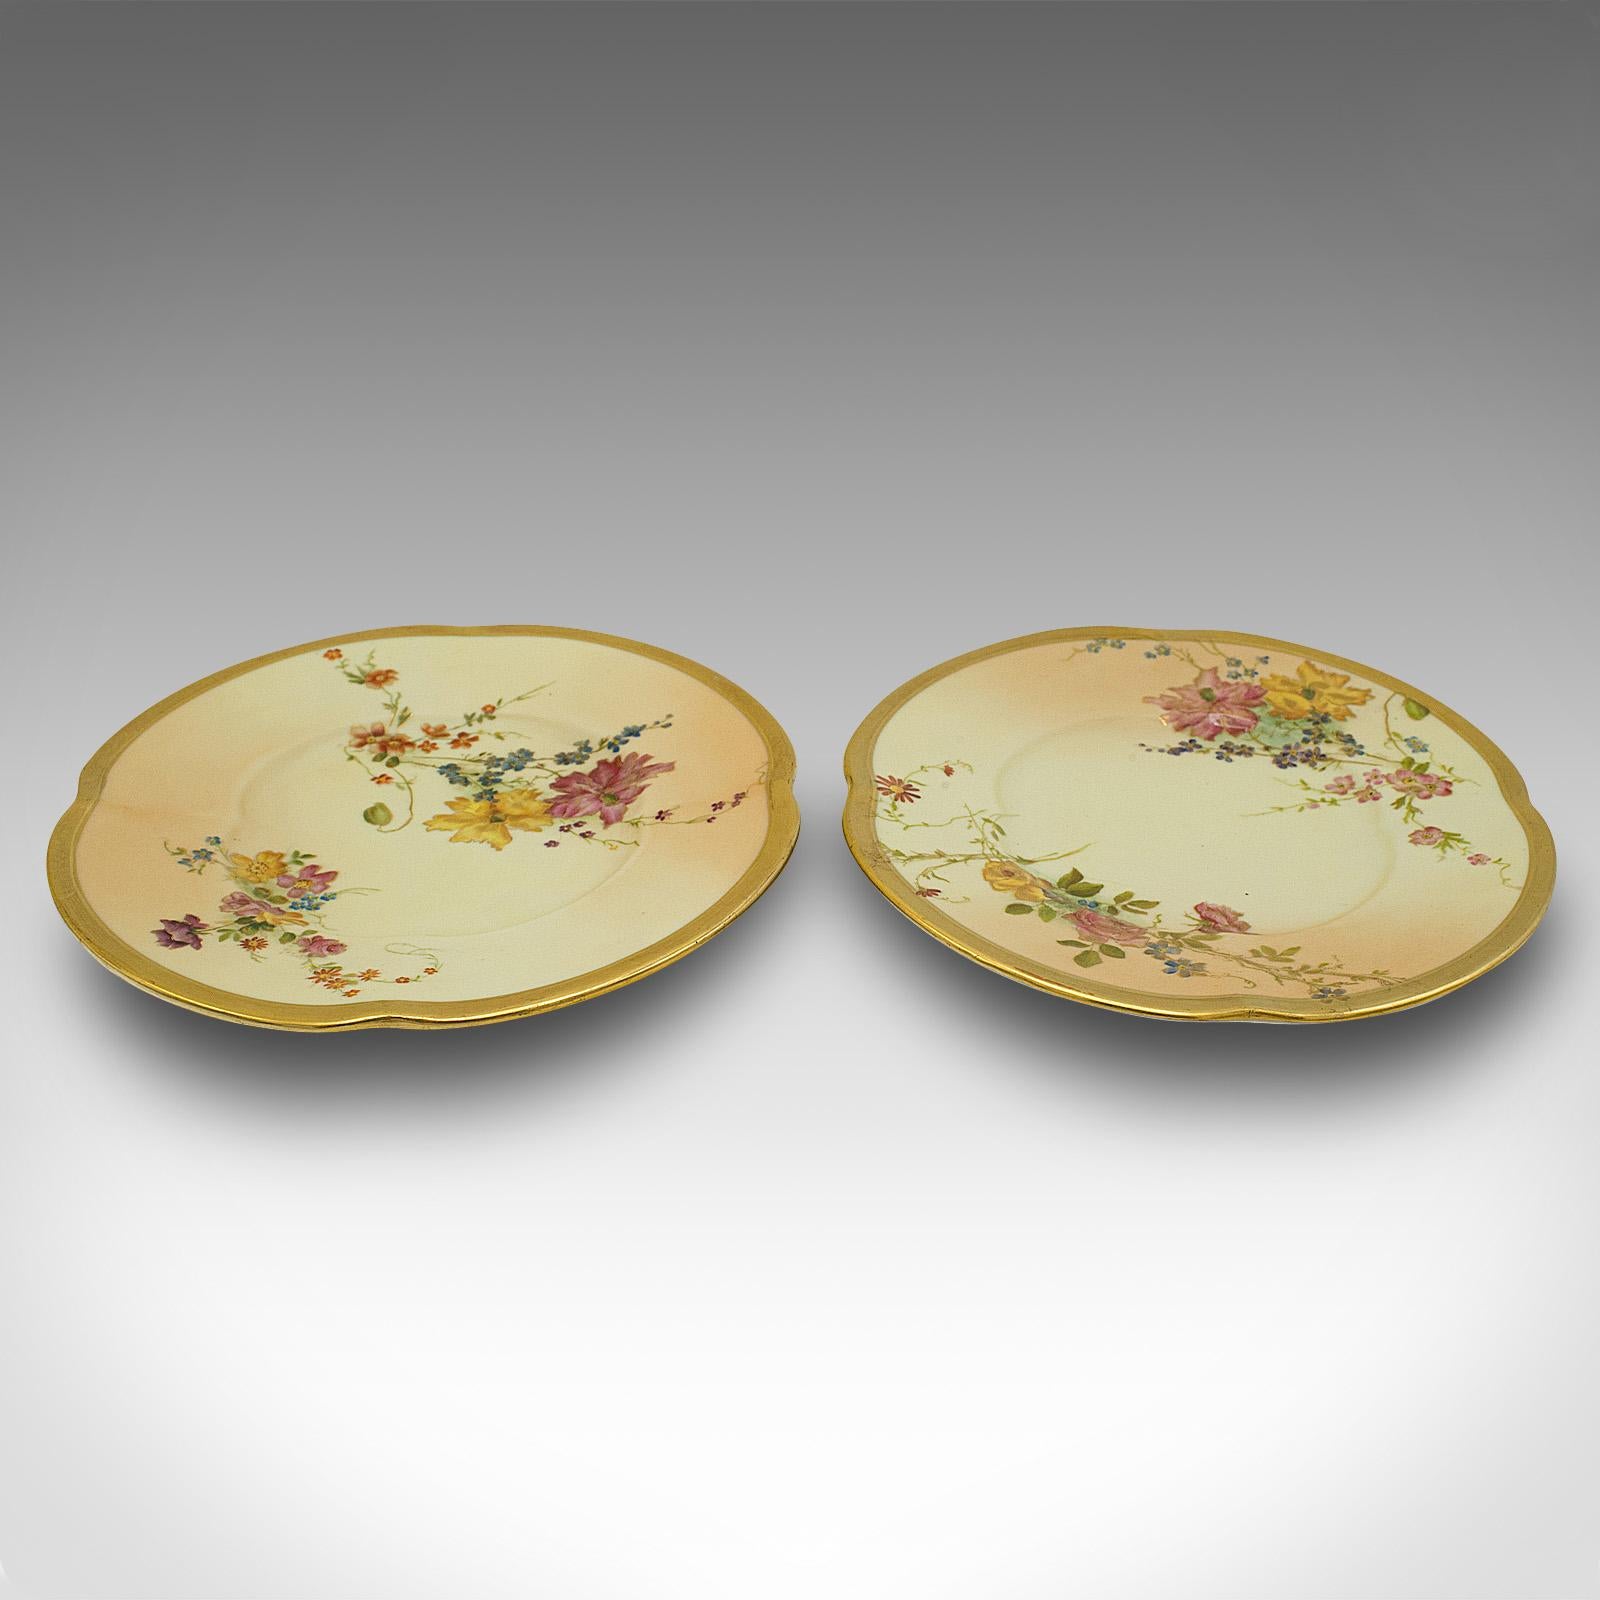 This is a pair of antique side plates. An English, ceramic decorative cake plate or saucer, dating to the late Victorian period, circa 1900.

Charming Victorian ceramics with pleasingly decorated finish
Displays a desirable aged patina and in